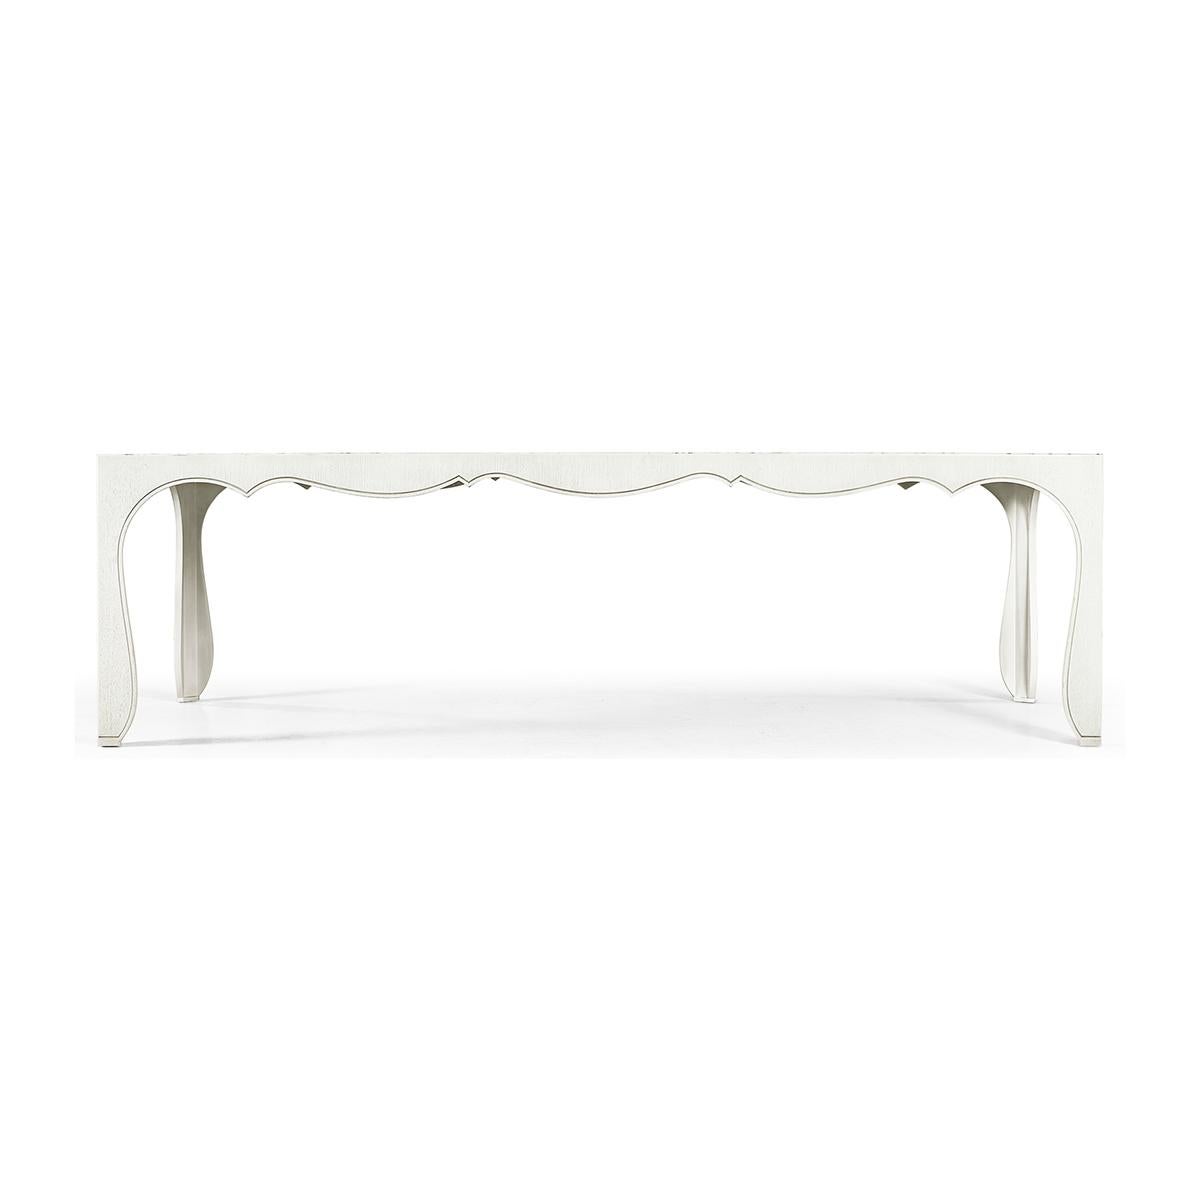 Modern Sinuous dining table, the wood dining table boasts sinuous bracket legs that meet a curvaceous base for a flowing, dramatic profile that delights the eye.

Handcrafted and finished in a luxurious chalk white, Asperitas presents an exclusive